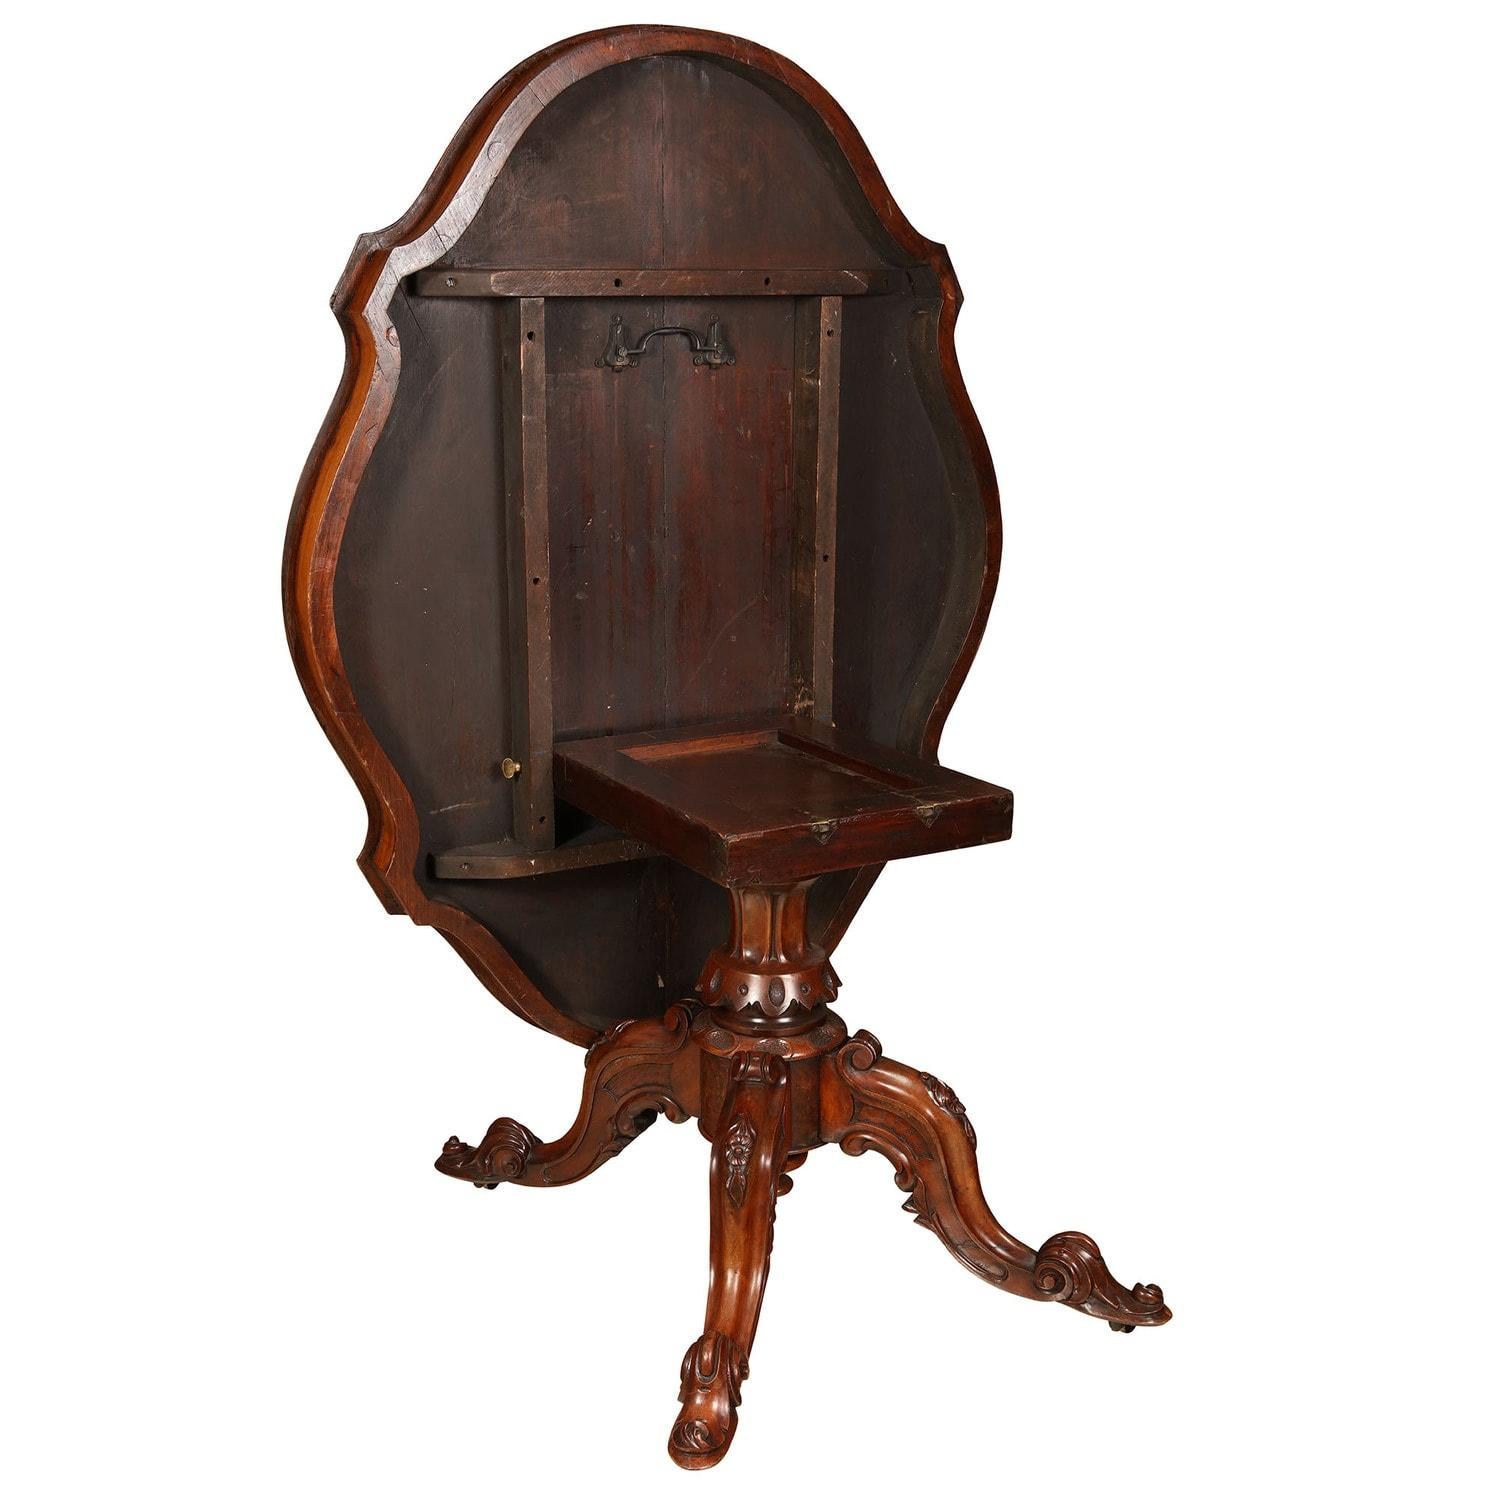 A Fine late 19th century tilt-top centre table with scalloped top, quarter veneered bookmatched veneers of highly figured burr walnut and inlaid with a foliate marquetry central panel and borders, raised on a pedestal base with carved scroll feet